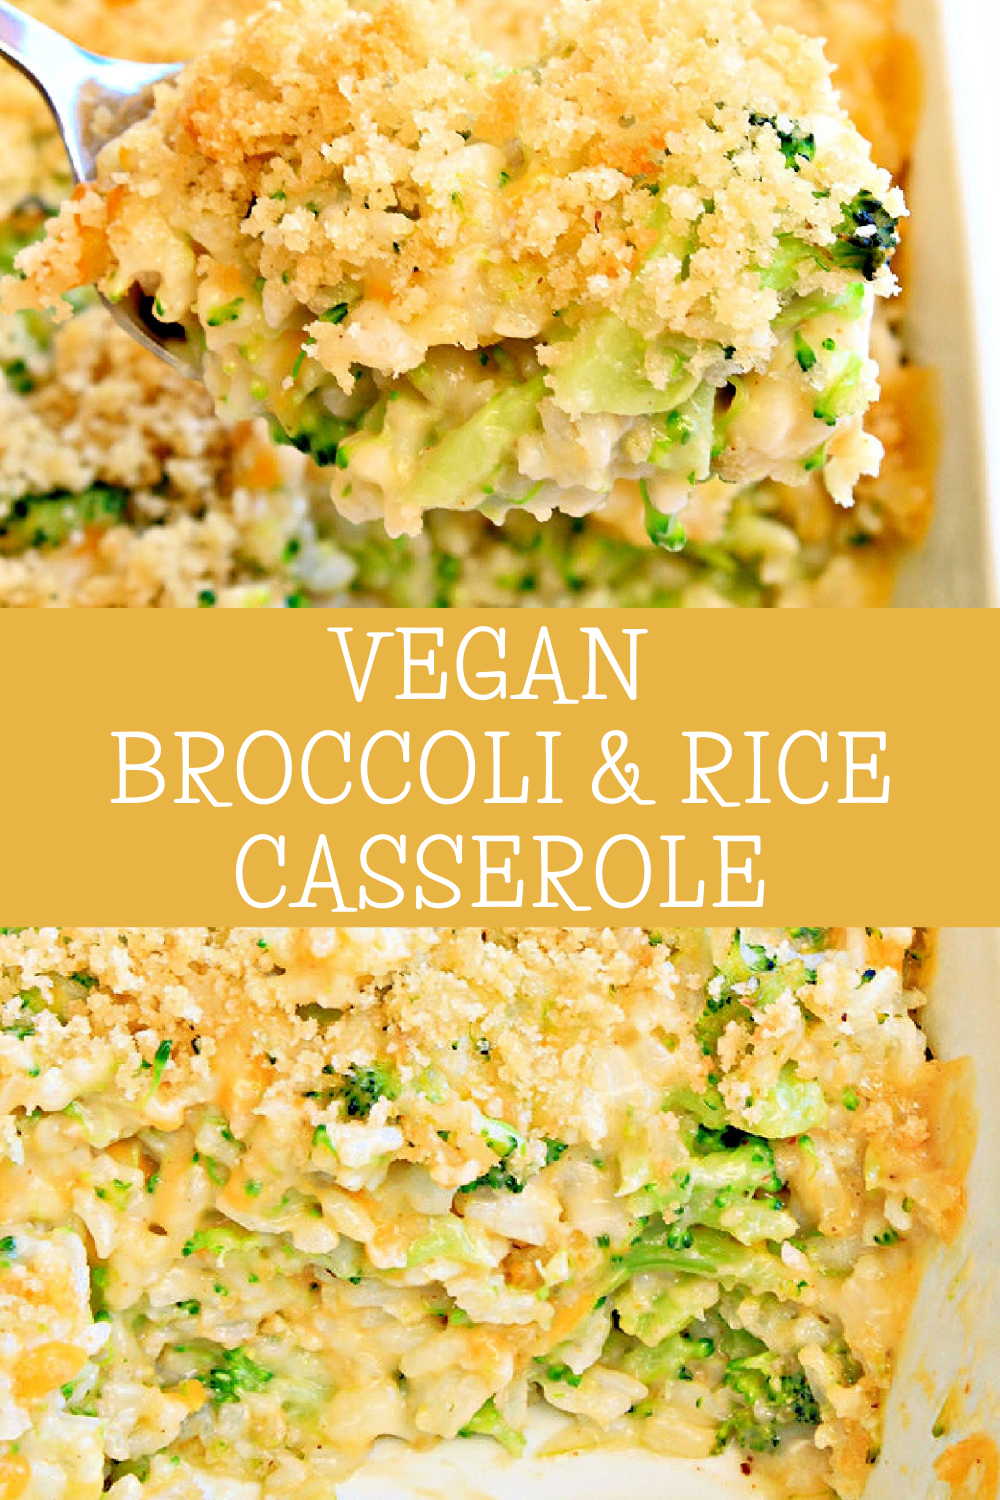 Broccoli and Rice Casserole ~ Fresh broccoli and fluffy rice with homemade vegan cheese sauce. An easy and comforting casserole classic! via @thiswifecooks